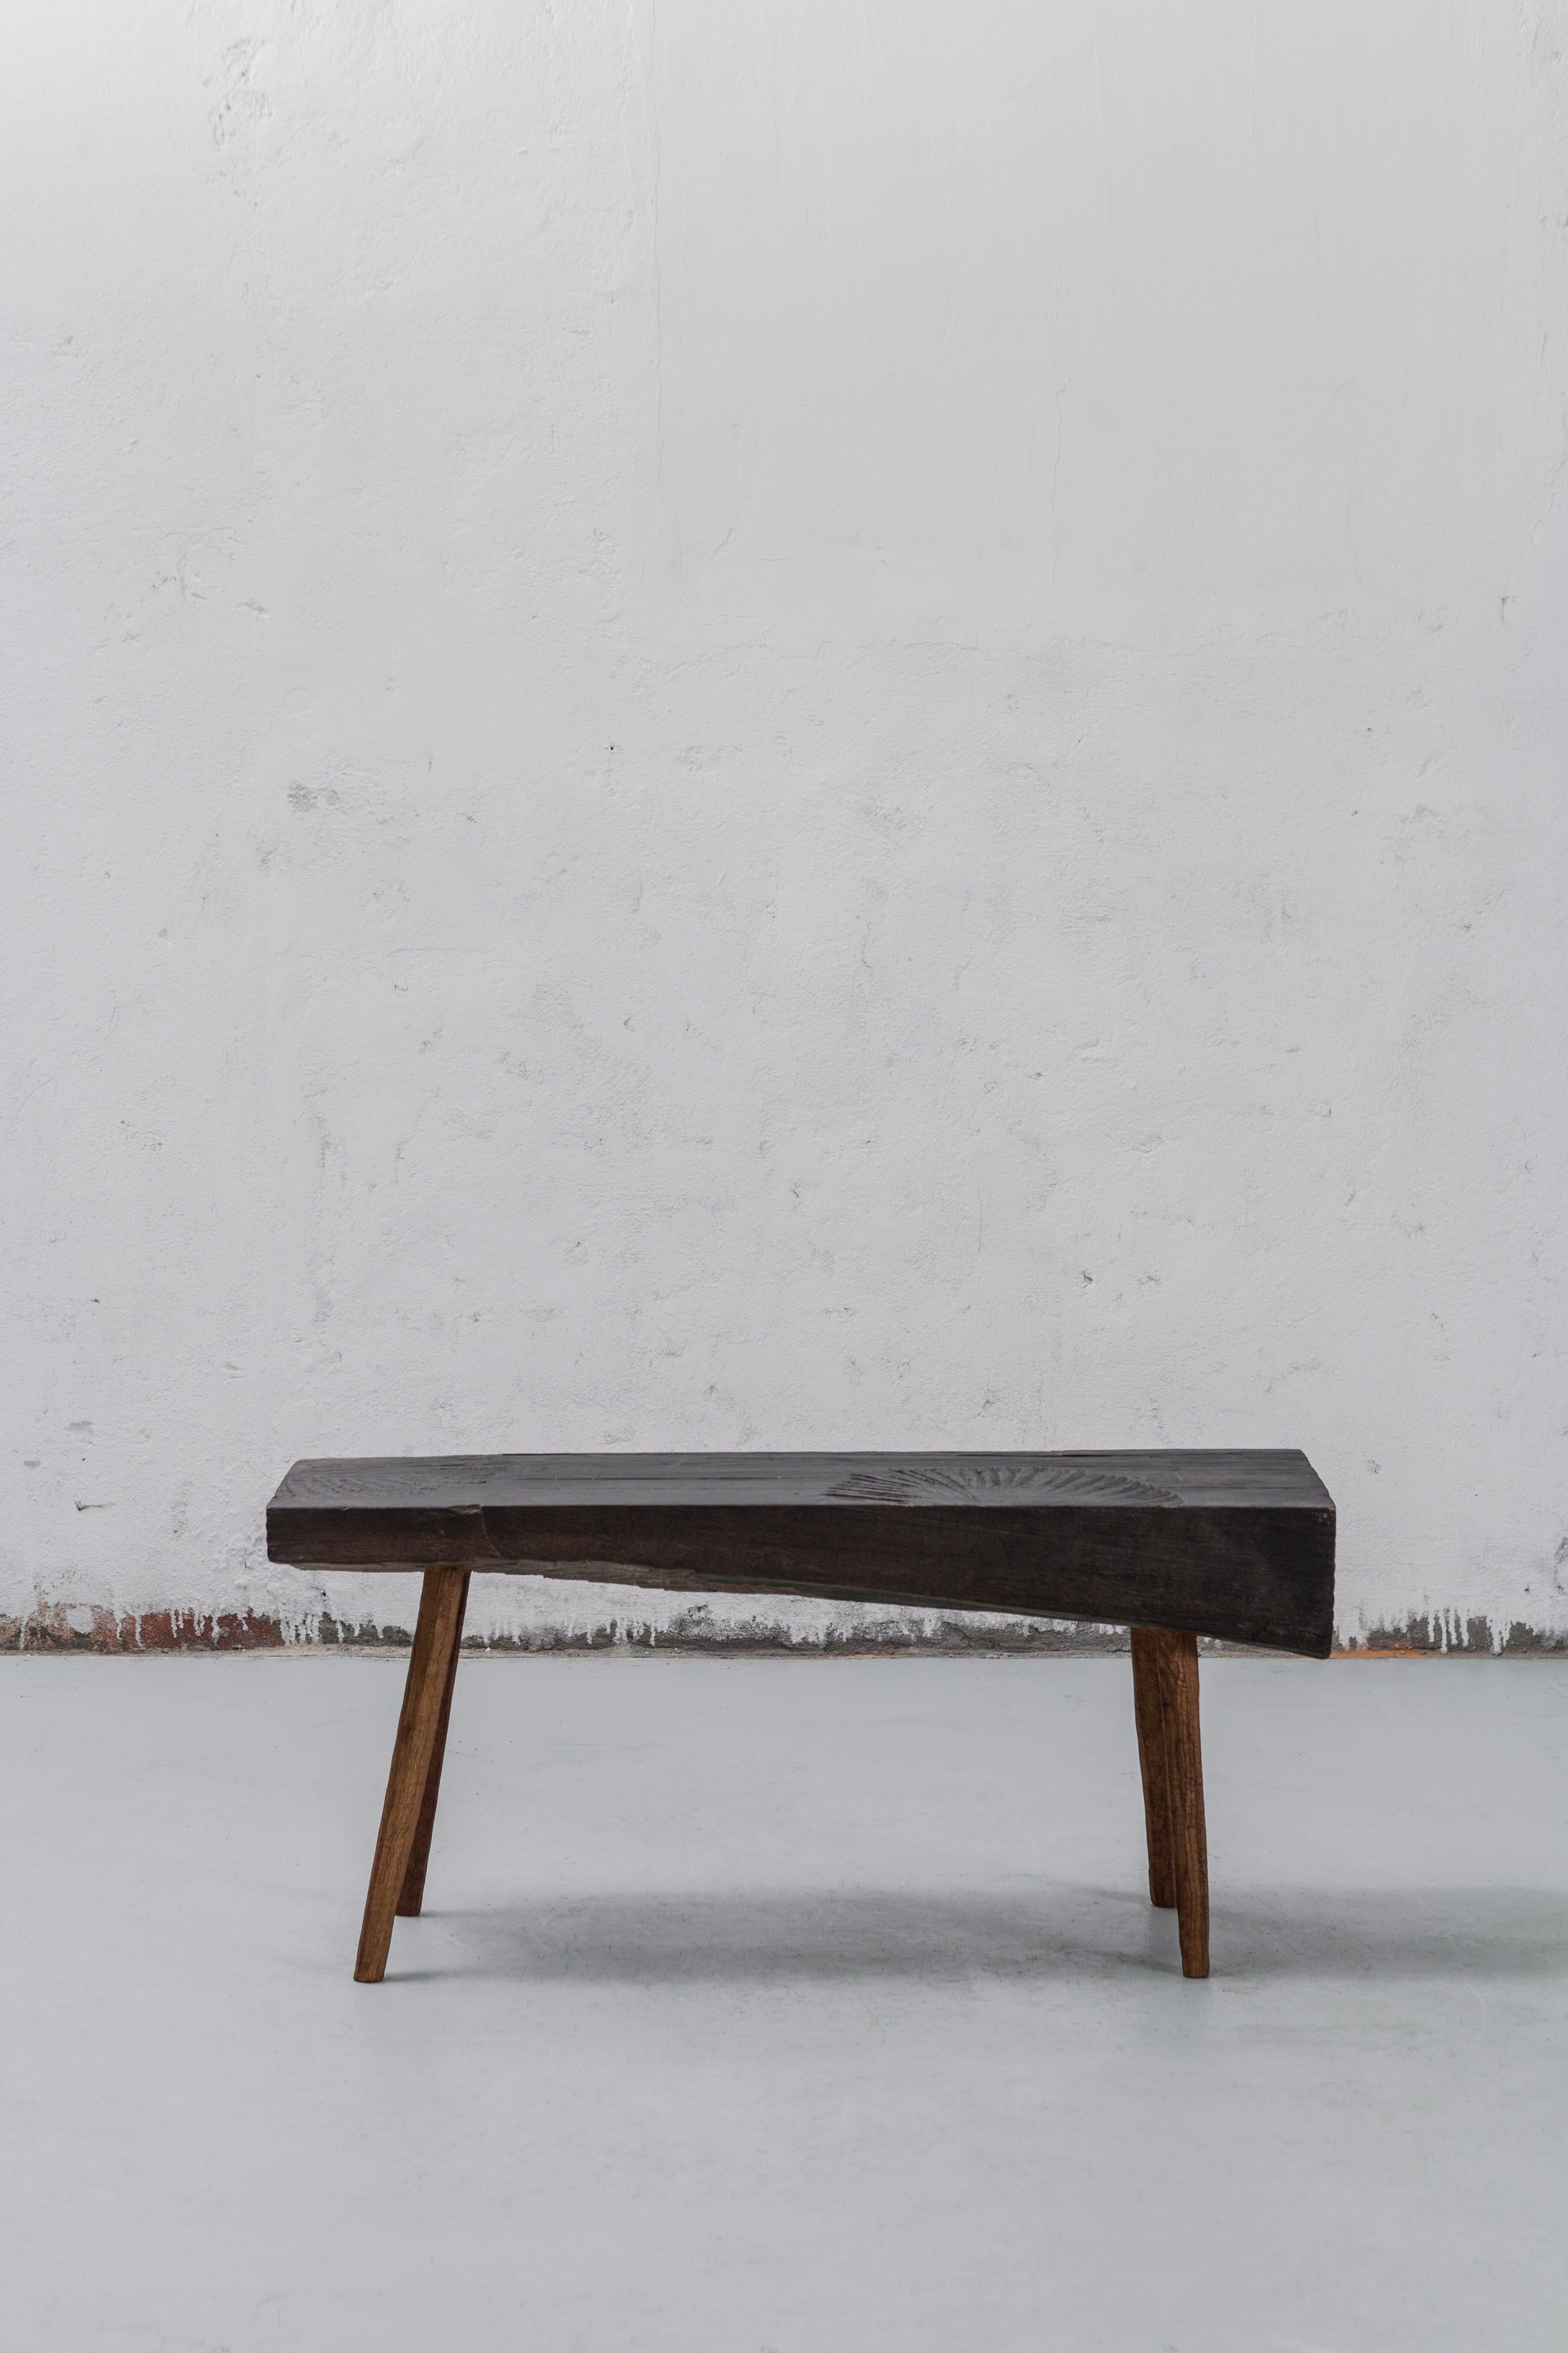 Small table made of solid oak (+ linseed oil)
Measures: 50 x 112 x 45 cm.

SÓHA design studio conceives and produces furniture design and decorative objects in solid oak in an authentic style. Inspiration to create all these items comes from the